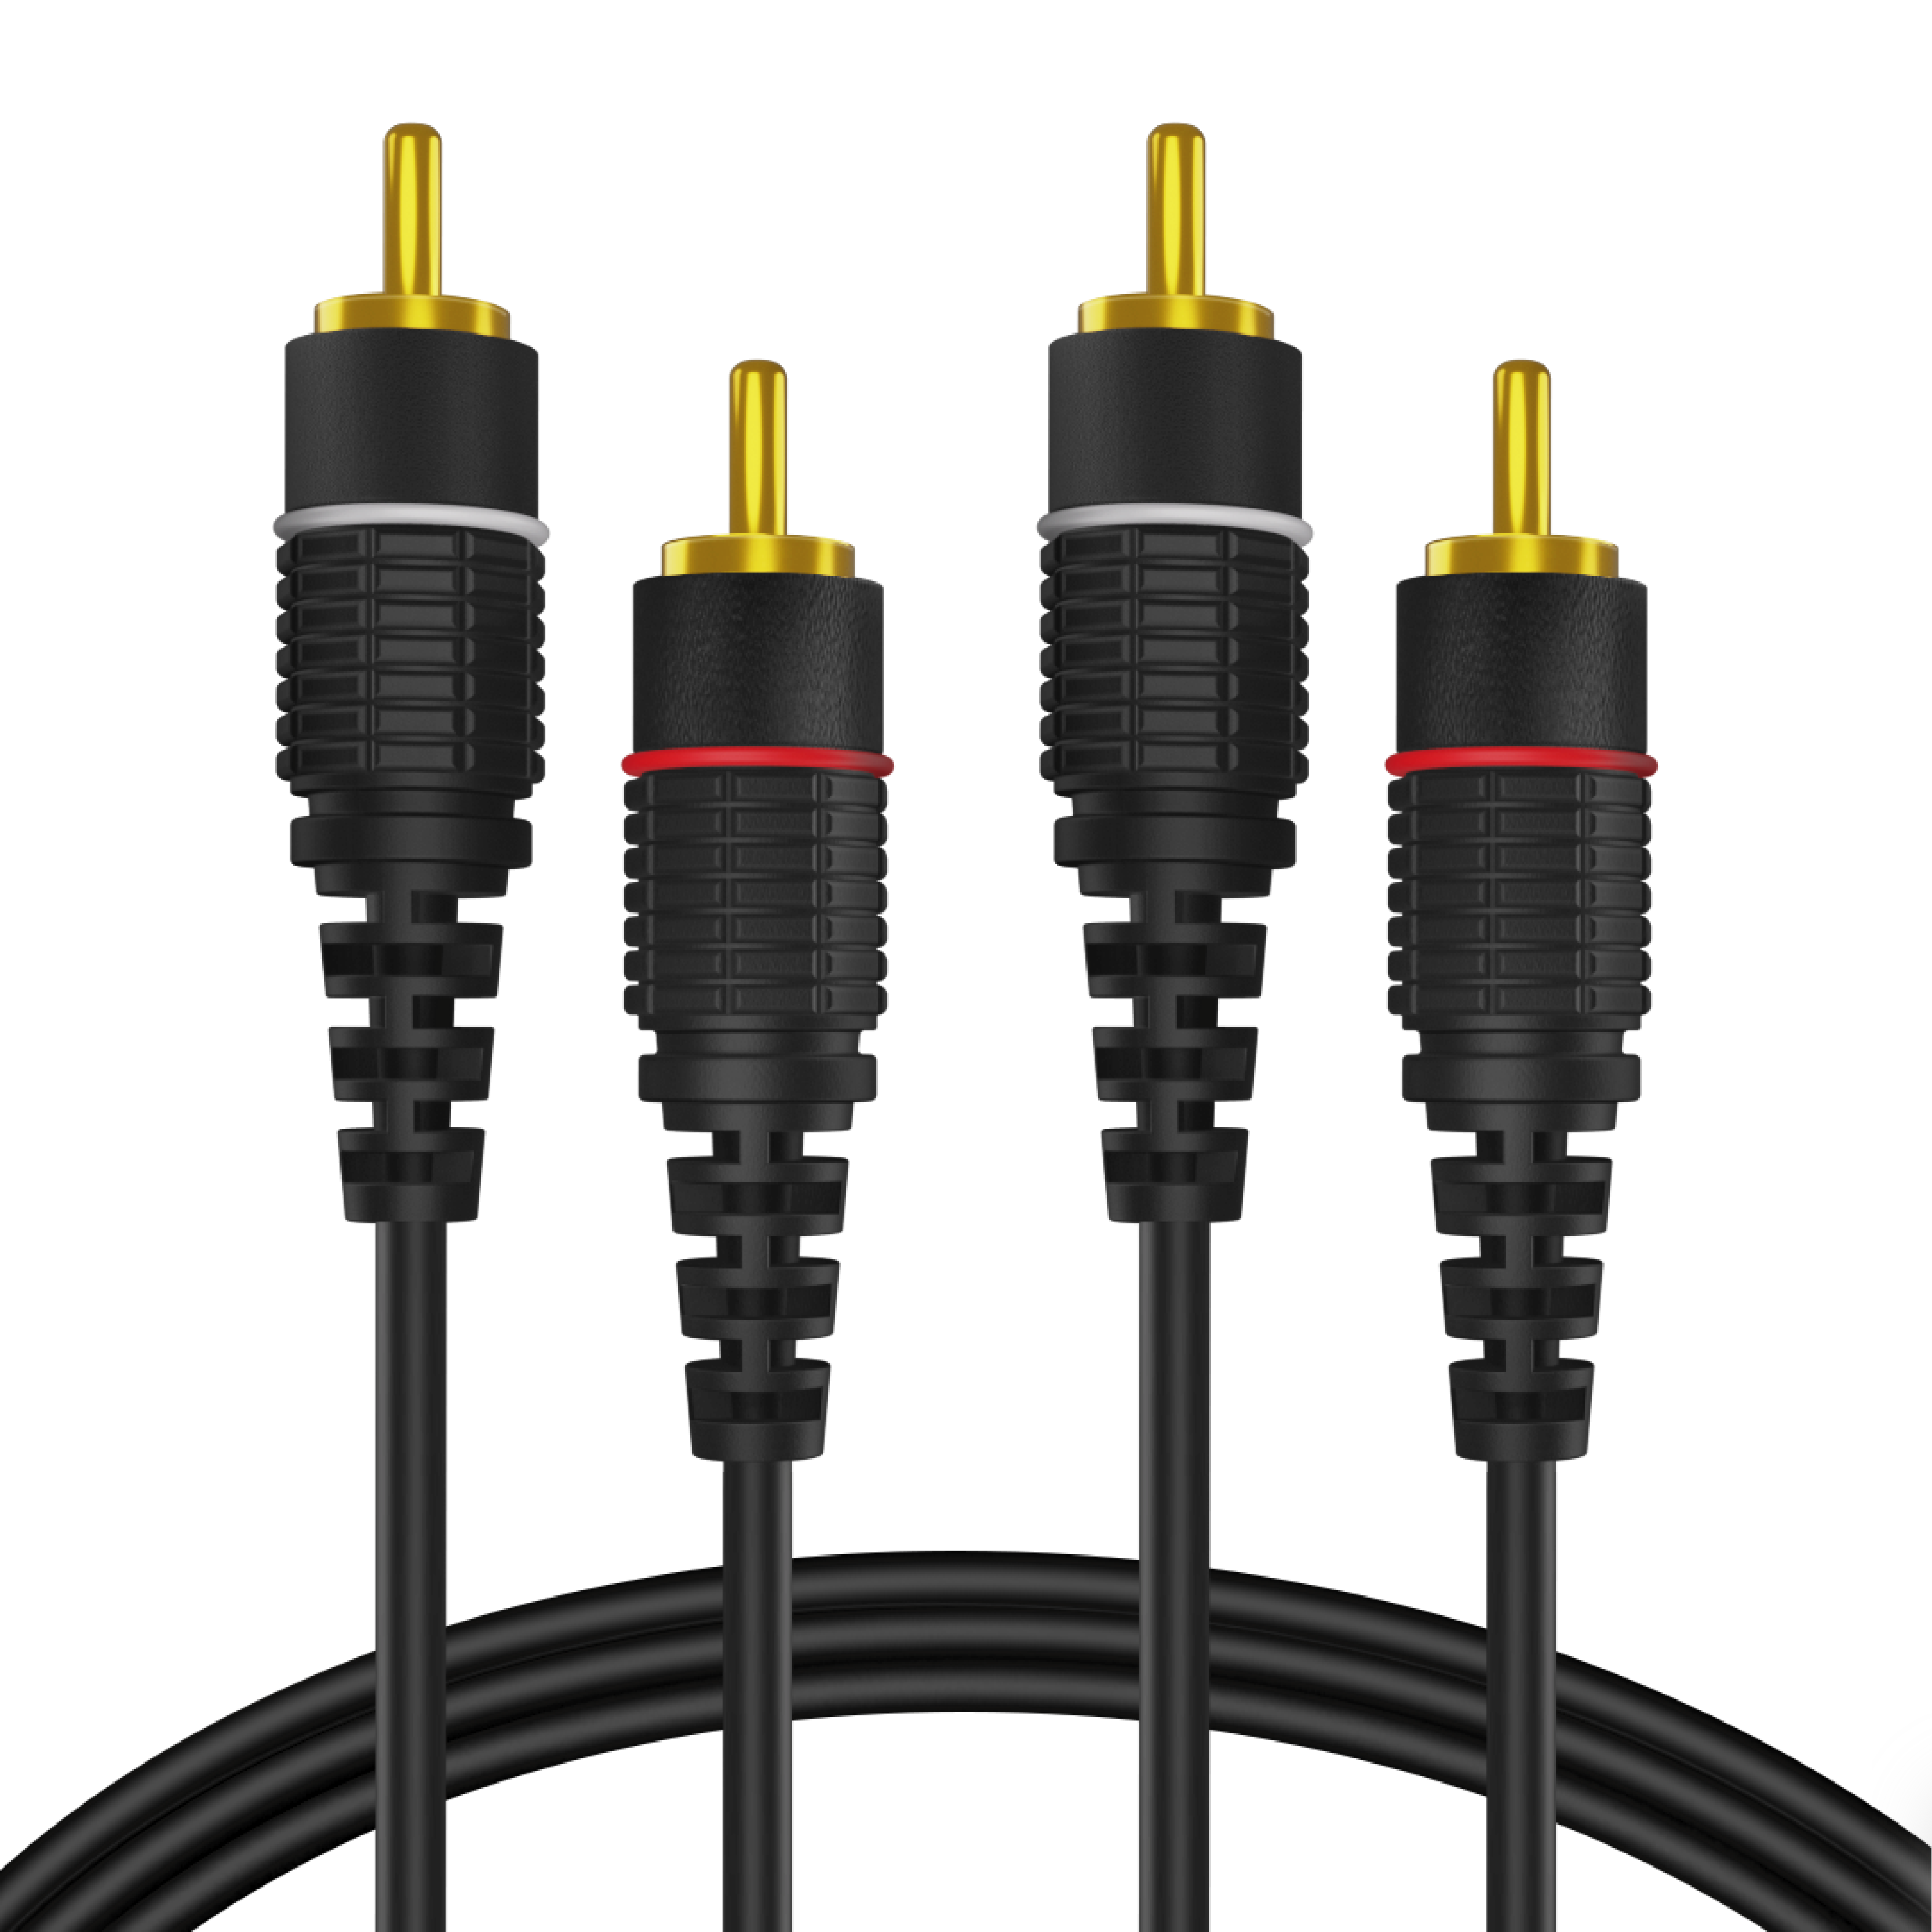 2RCA Stereo Audio Cable (25 Feet) - Dual RCA Plug M/M 2 Channel (Right and Left) Gold Plated Dual Shielded RCA to RCA Male Connectors Black - image 2 of 6